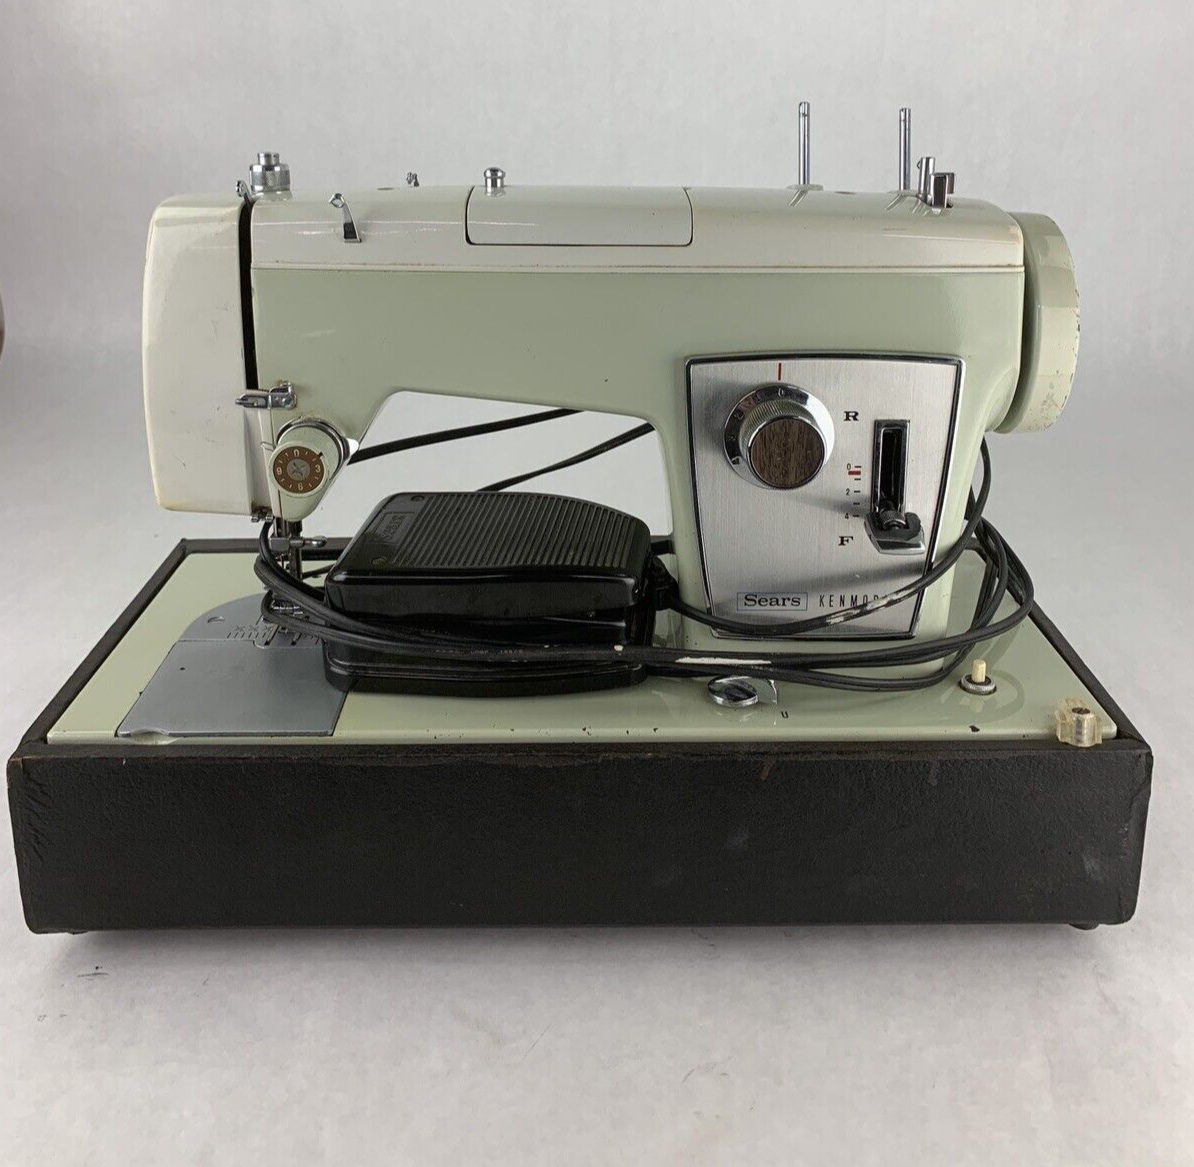 Sears Kenmore Sewing Machine 2142 For Parts and Repair No Power